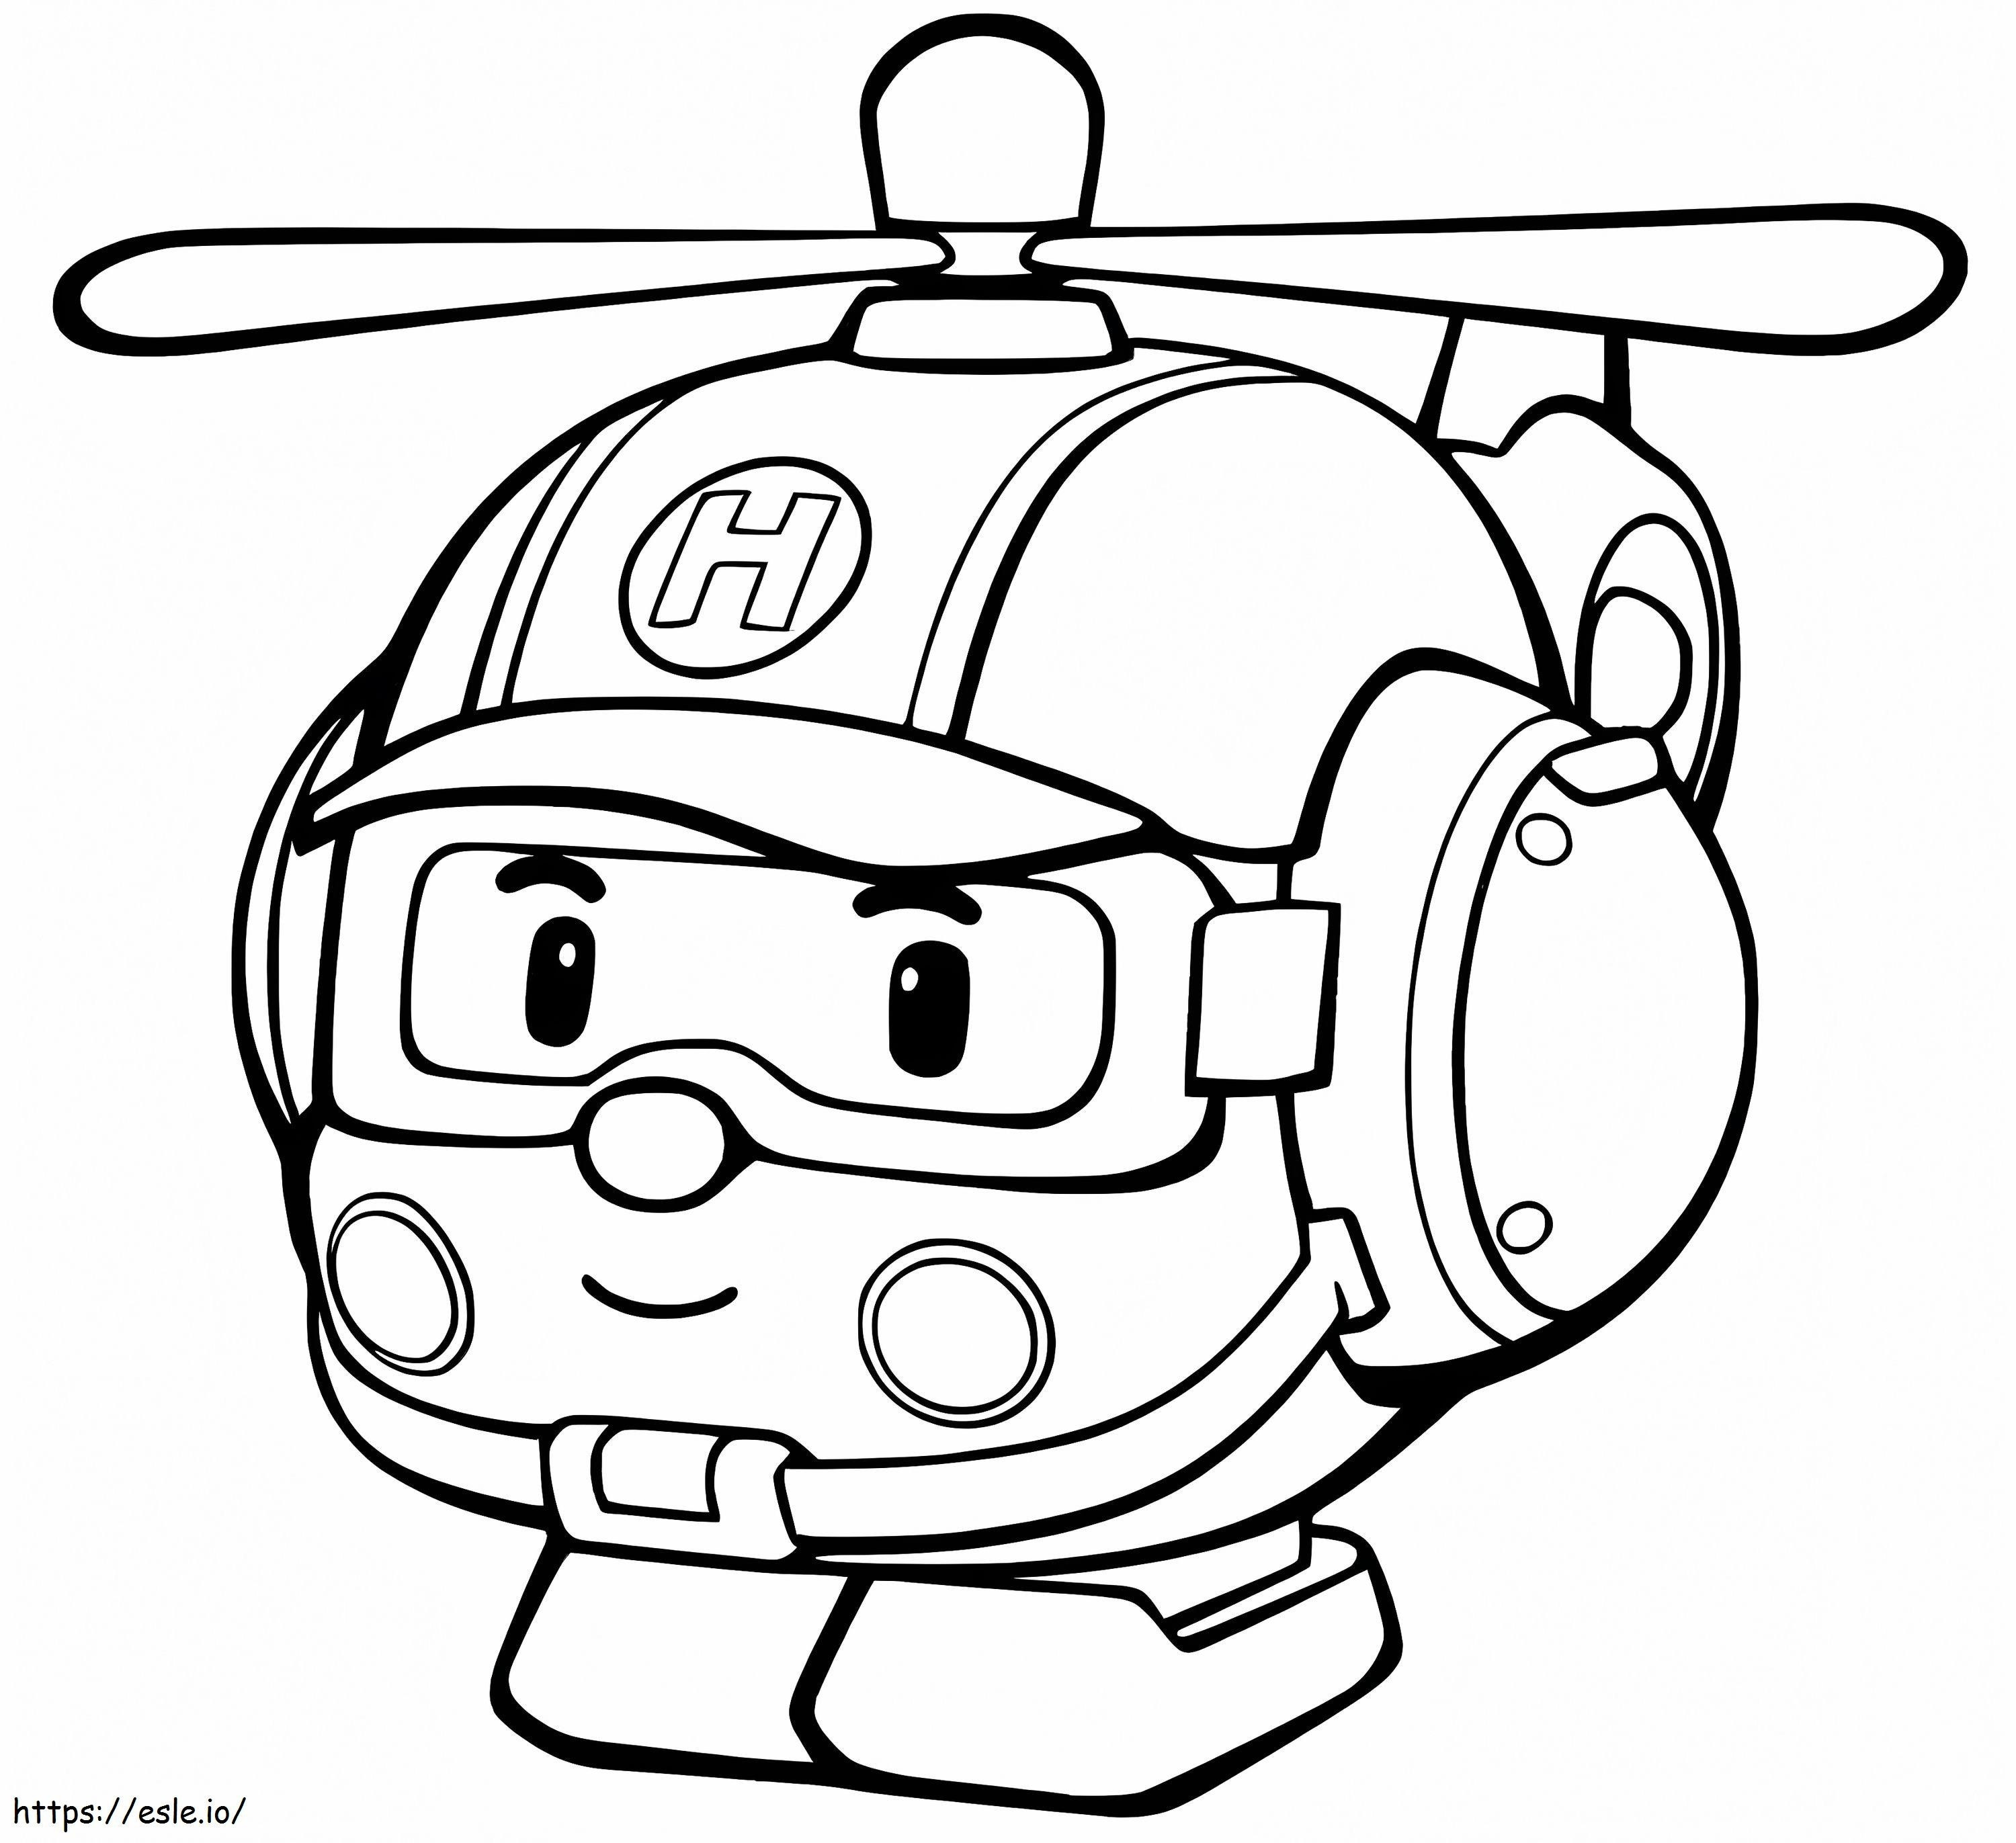 Helly Helicopter coloring page